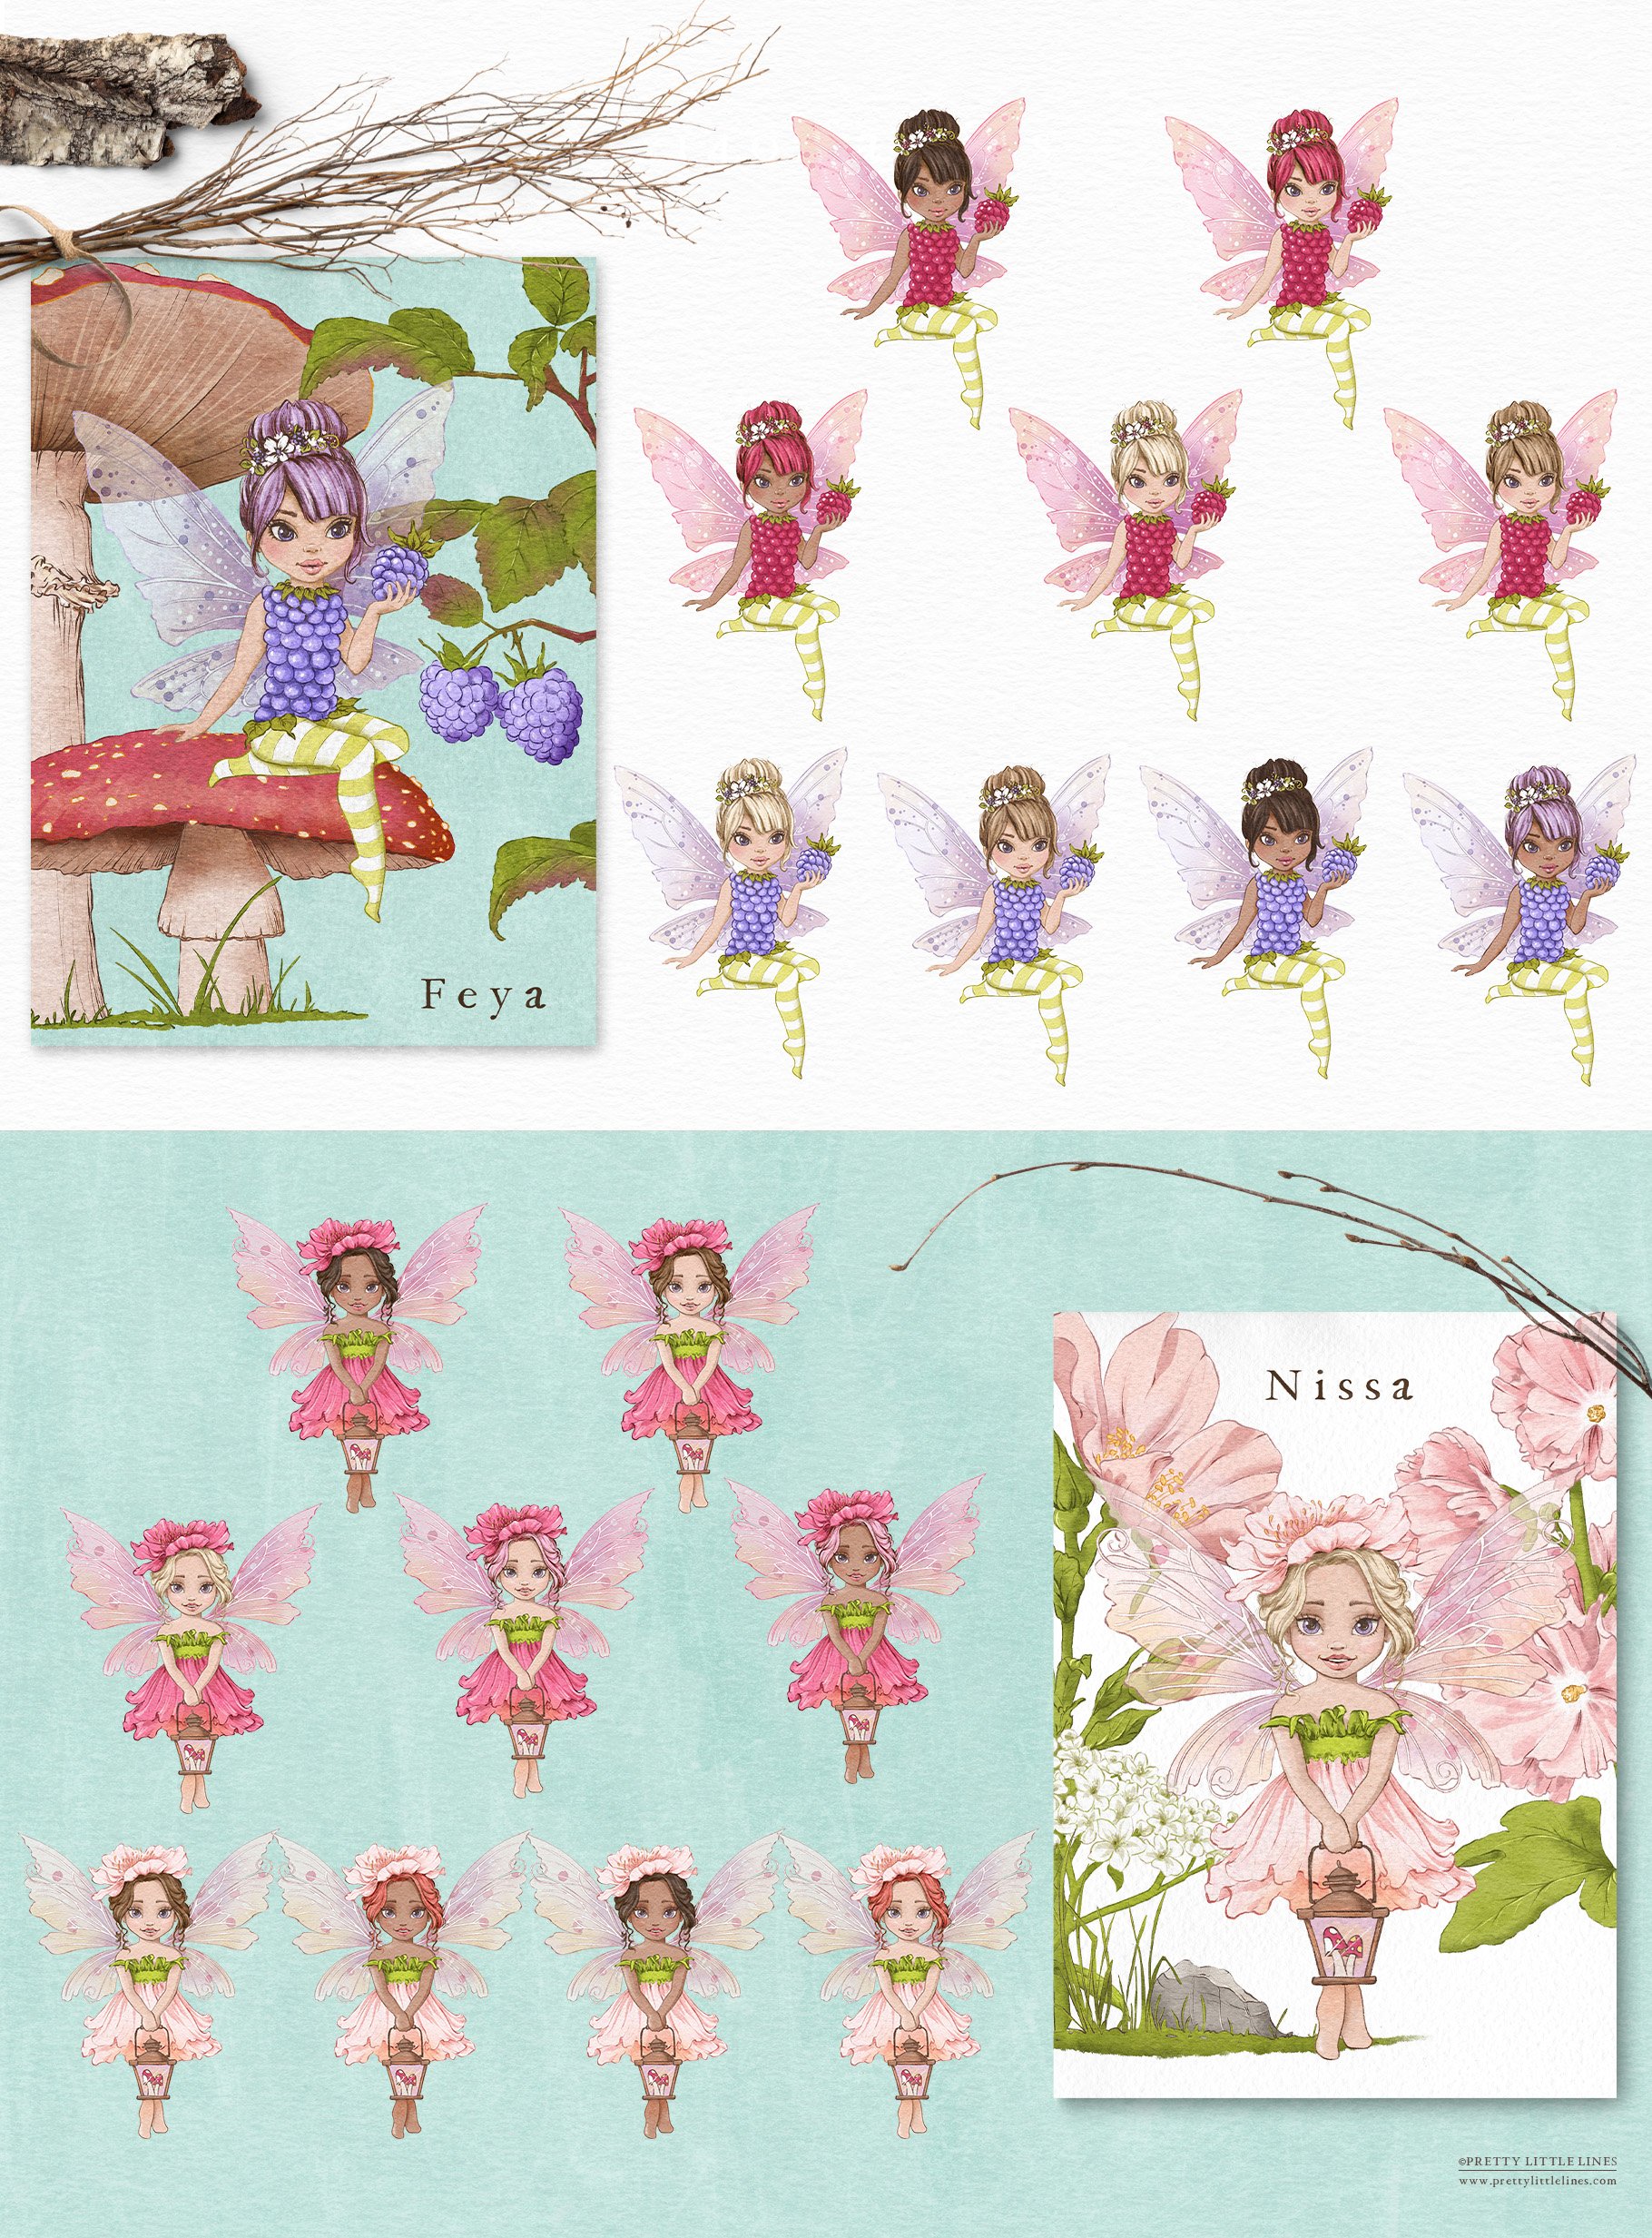 Fairies – A Whimsical Woodland Illustration Collection